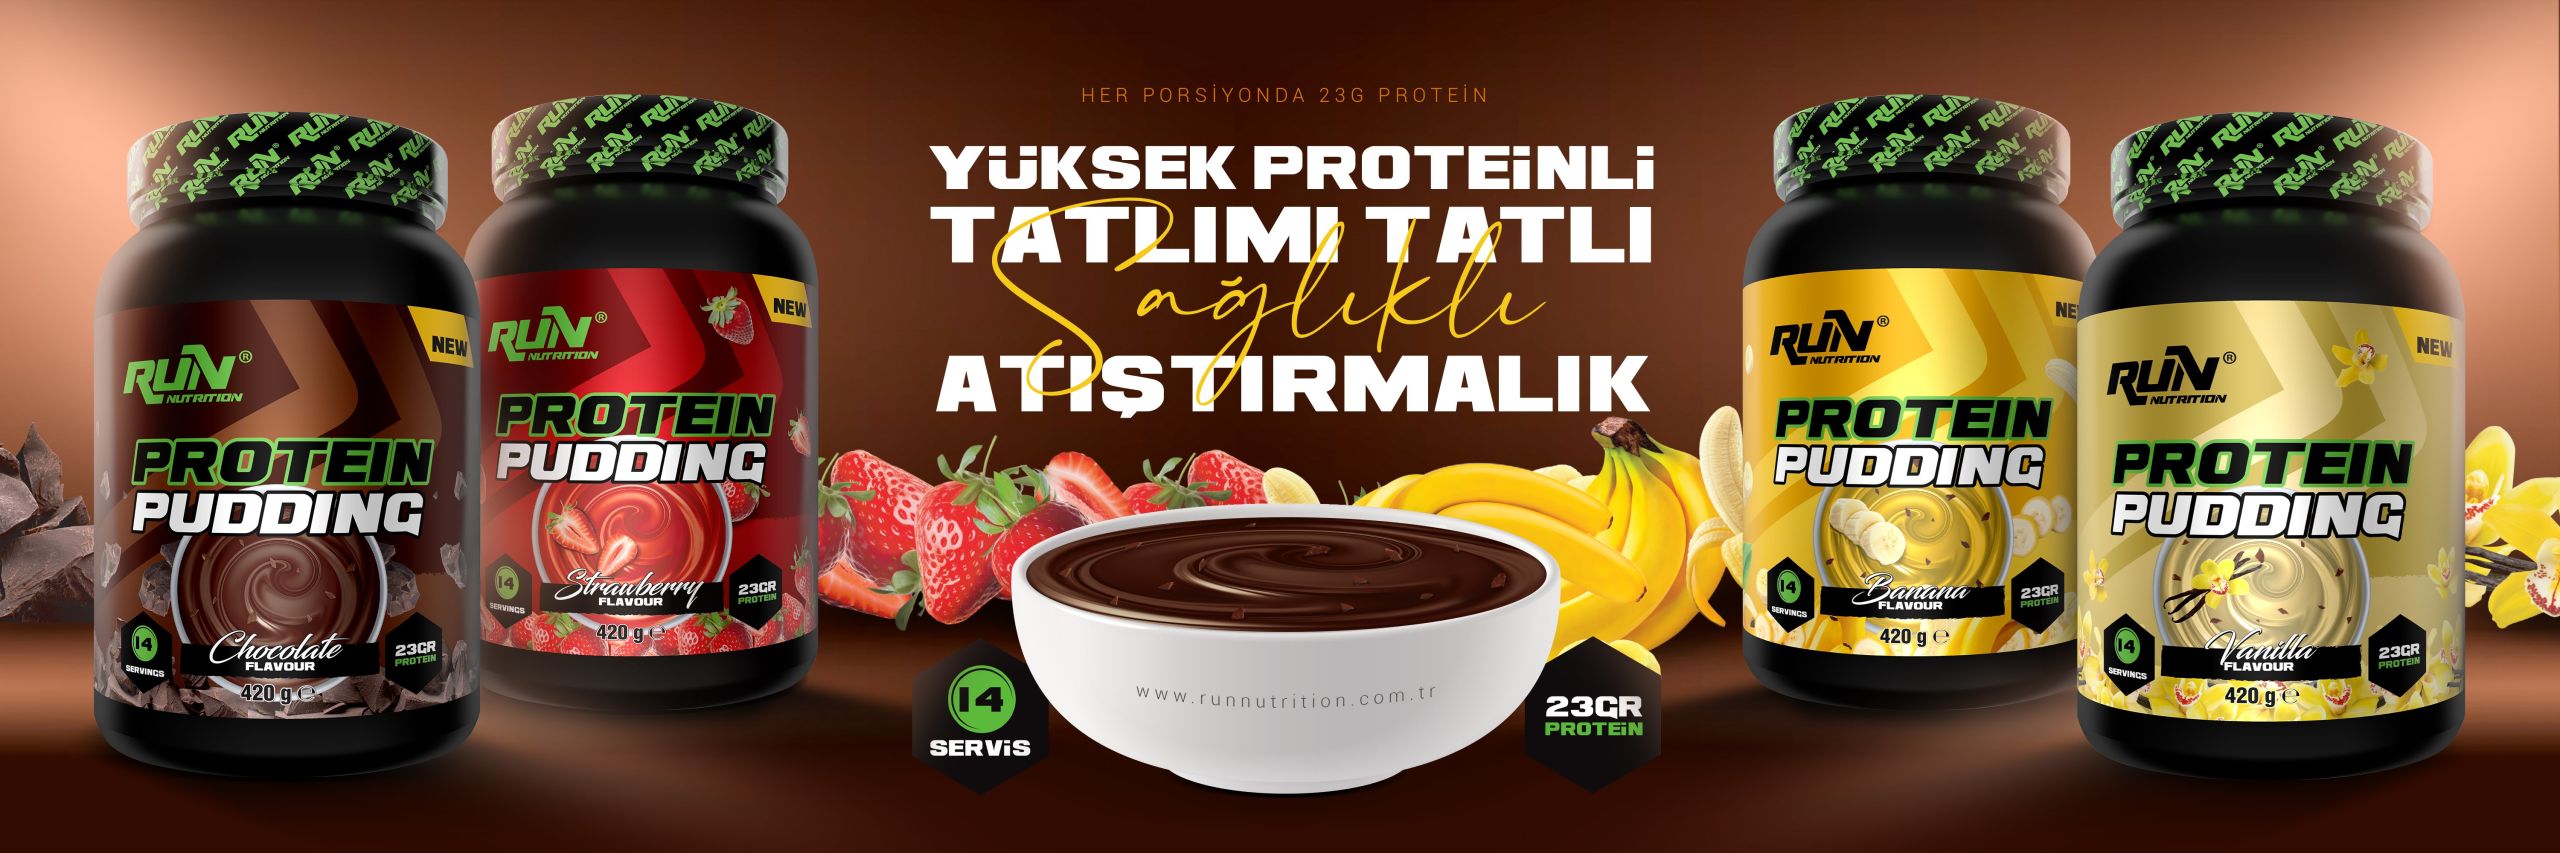 proteinpuding